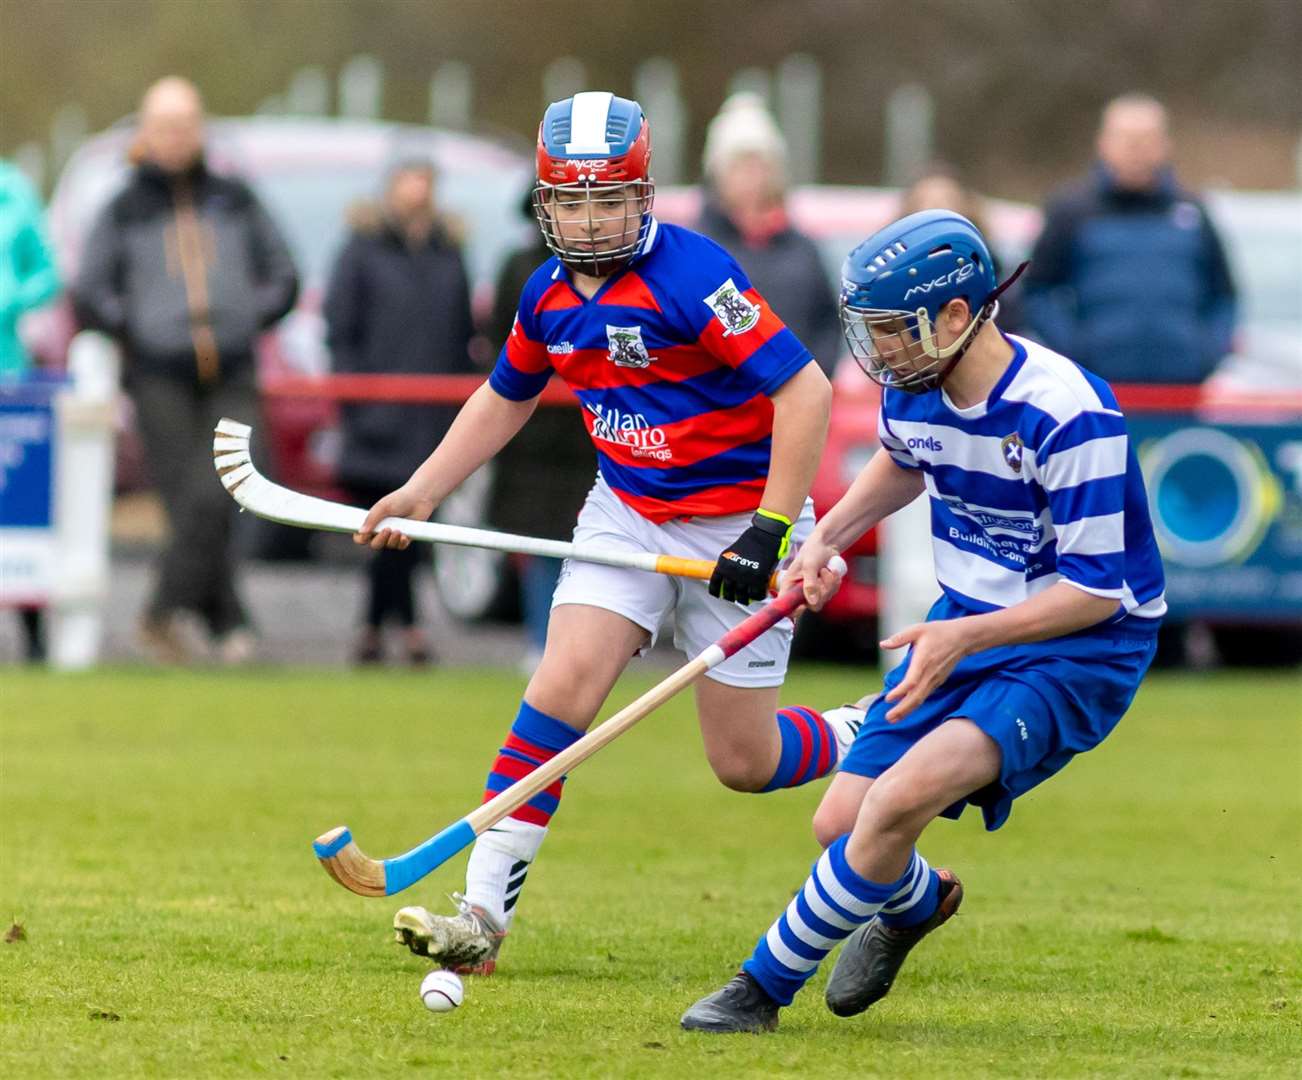 Young shinty players in action.